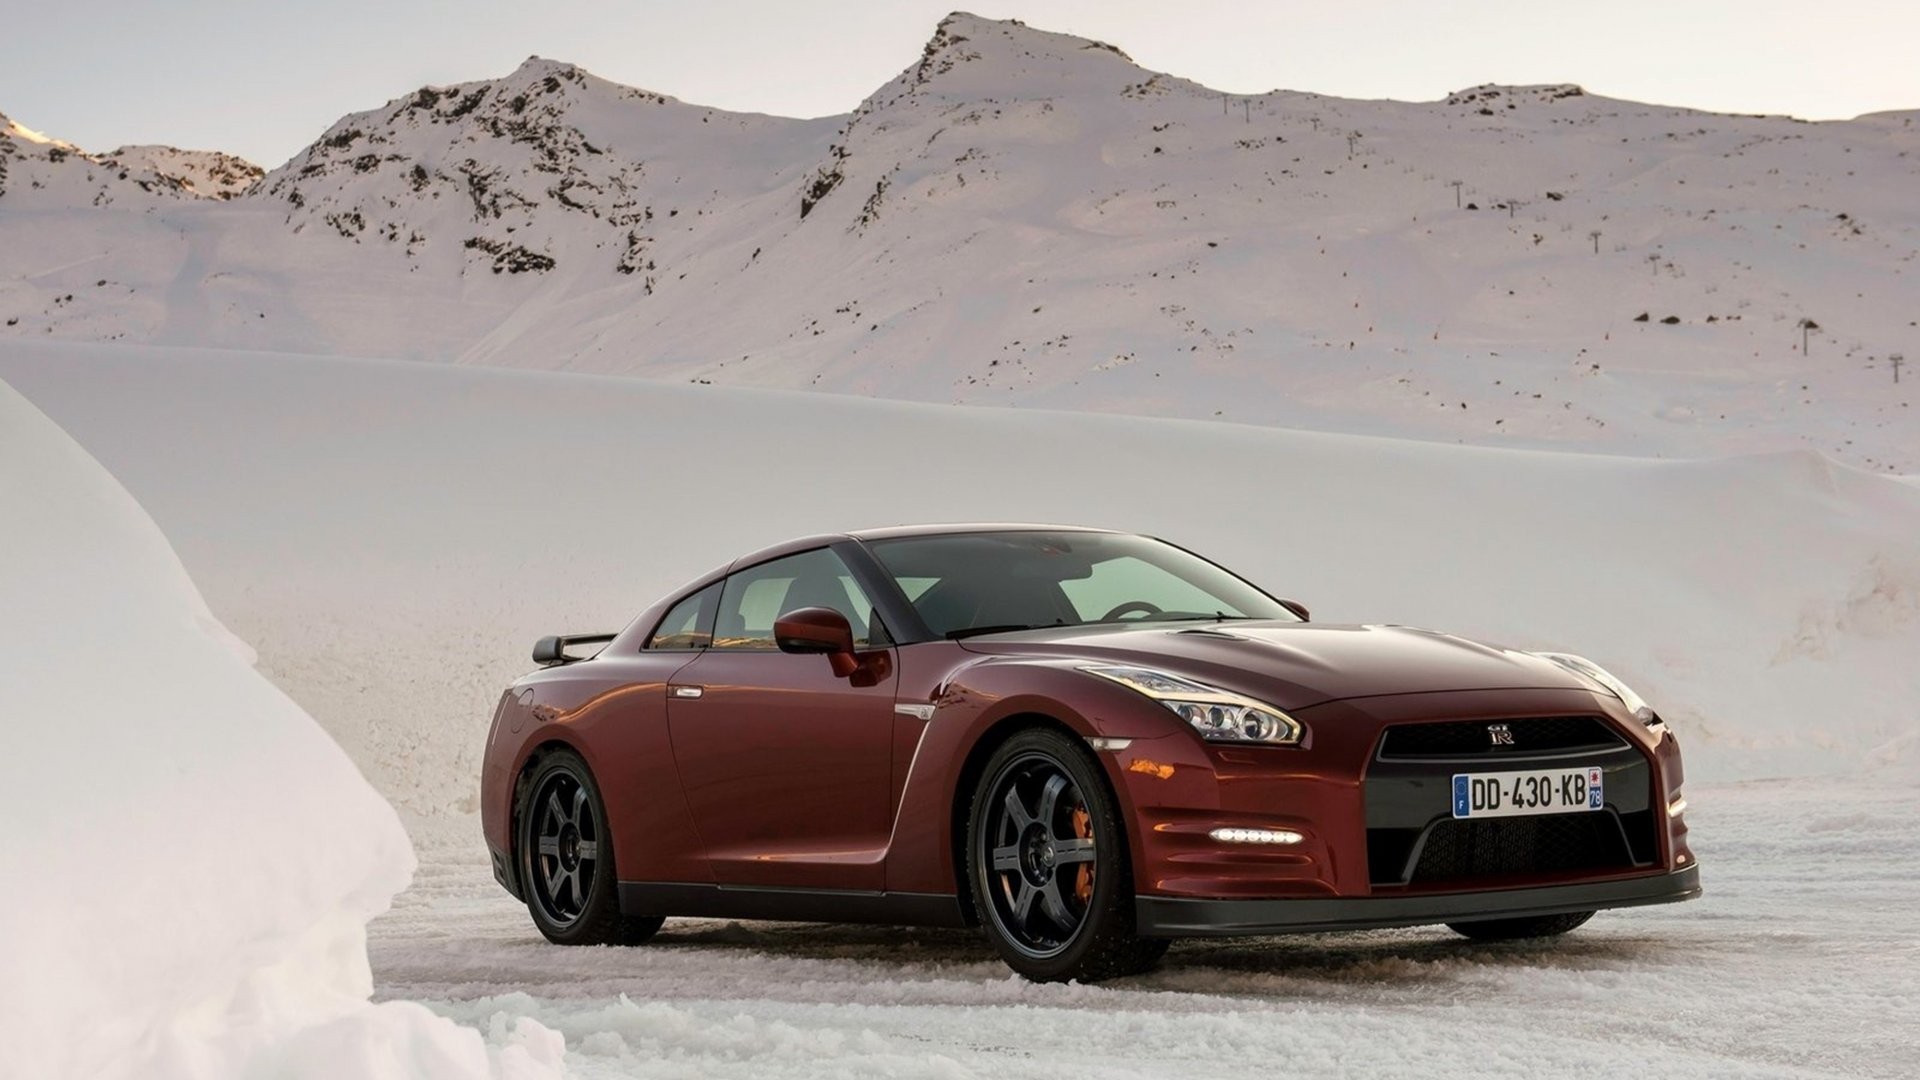 General 1920x1080 Nissan Nissan GT-R winter car vehicle mountains numbers red cars